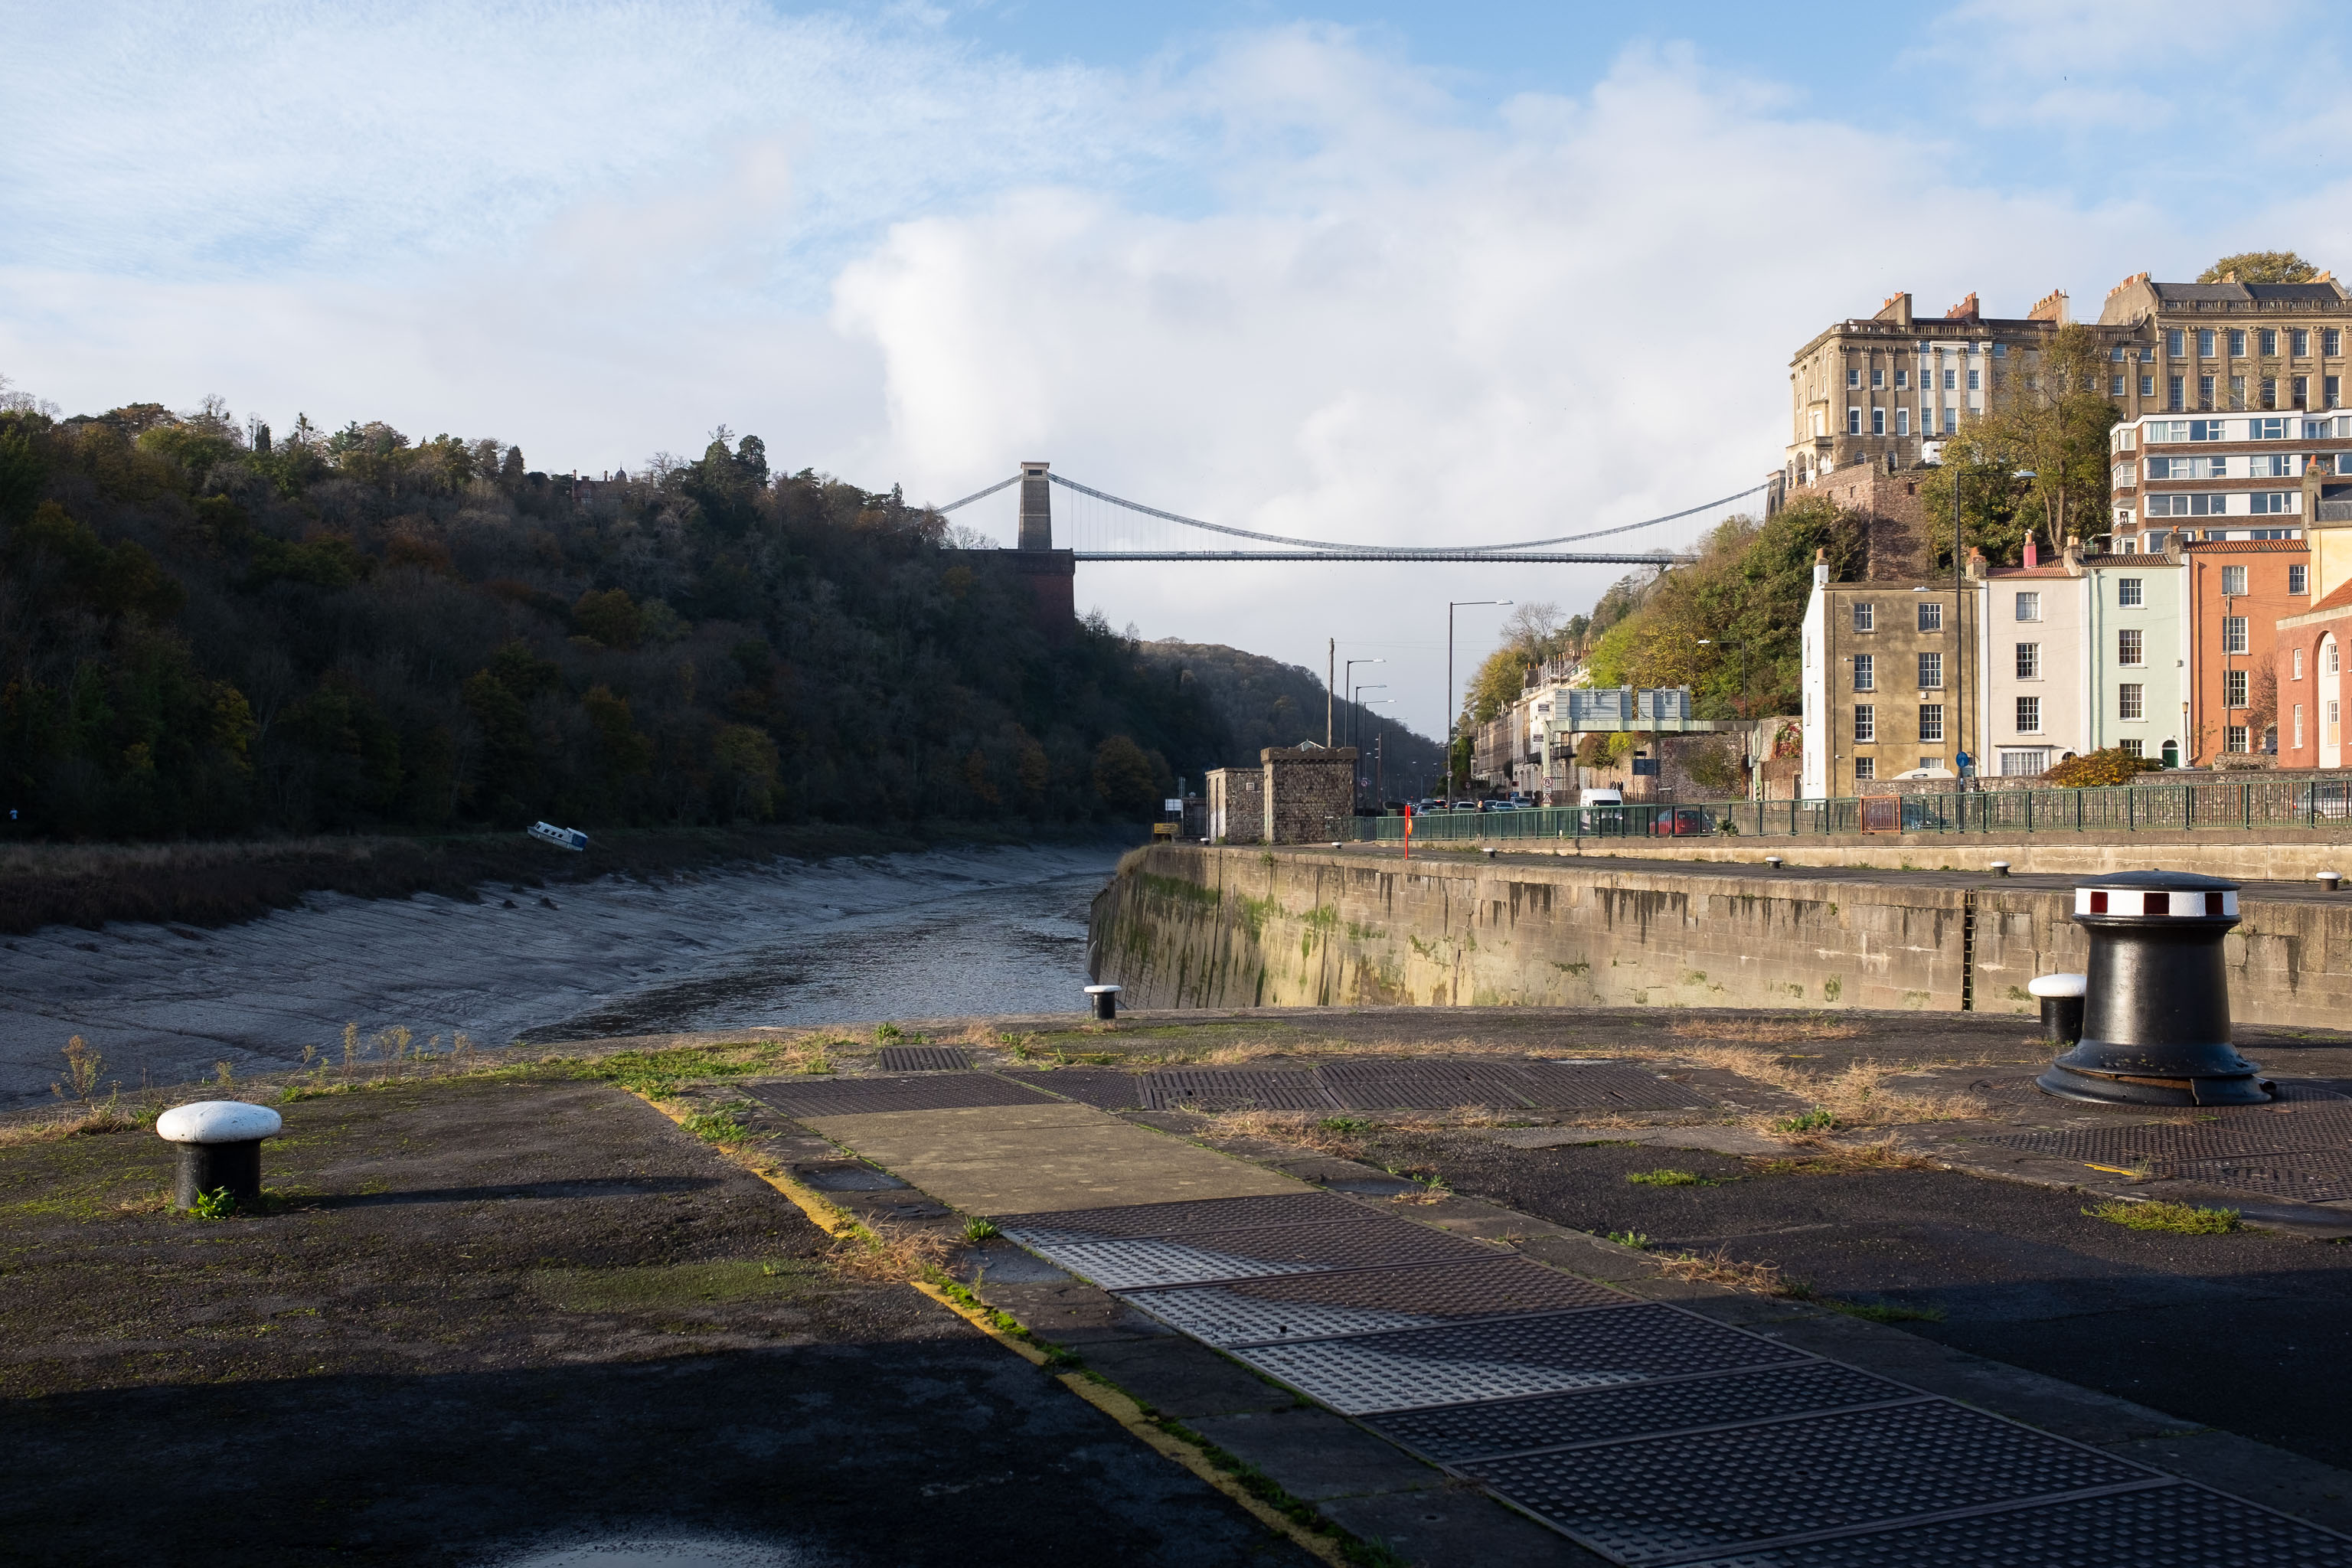 End of Entrance Lock
The spike of land with the dockkeepers' cottage on it has been cordoned off for the last couple months as I write this (on 4 Jan 2021; I'm processi...